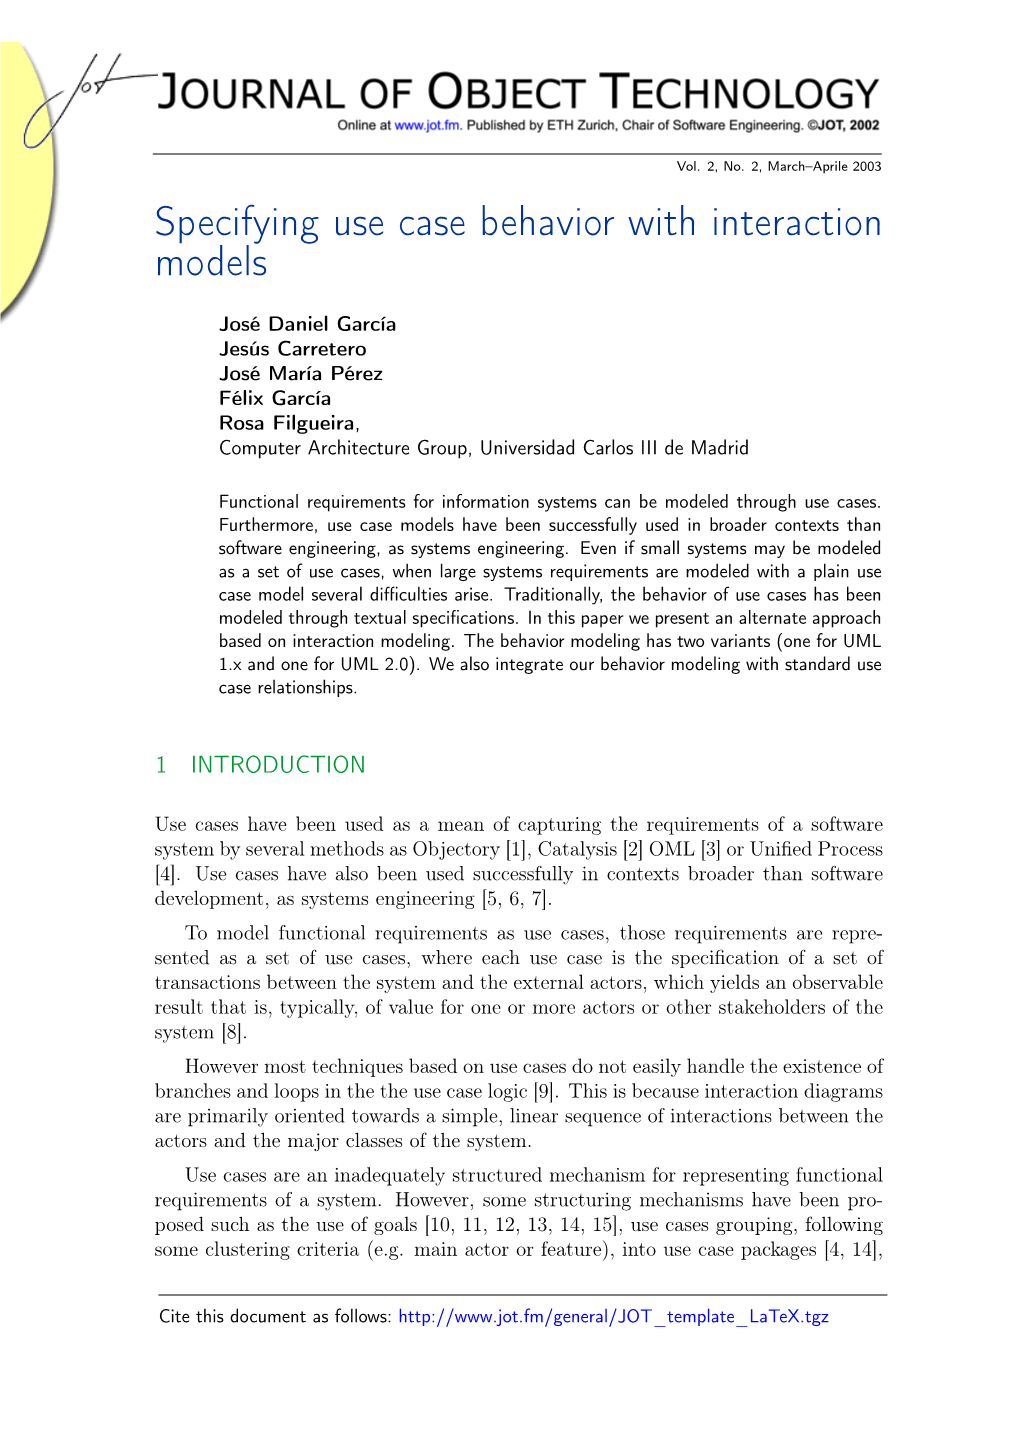 Specifying Use Case Behavior with Interaction Models